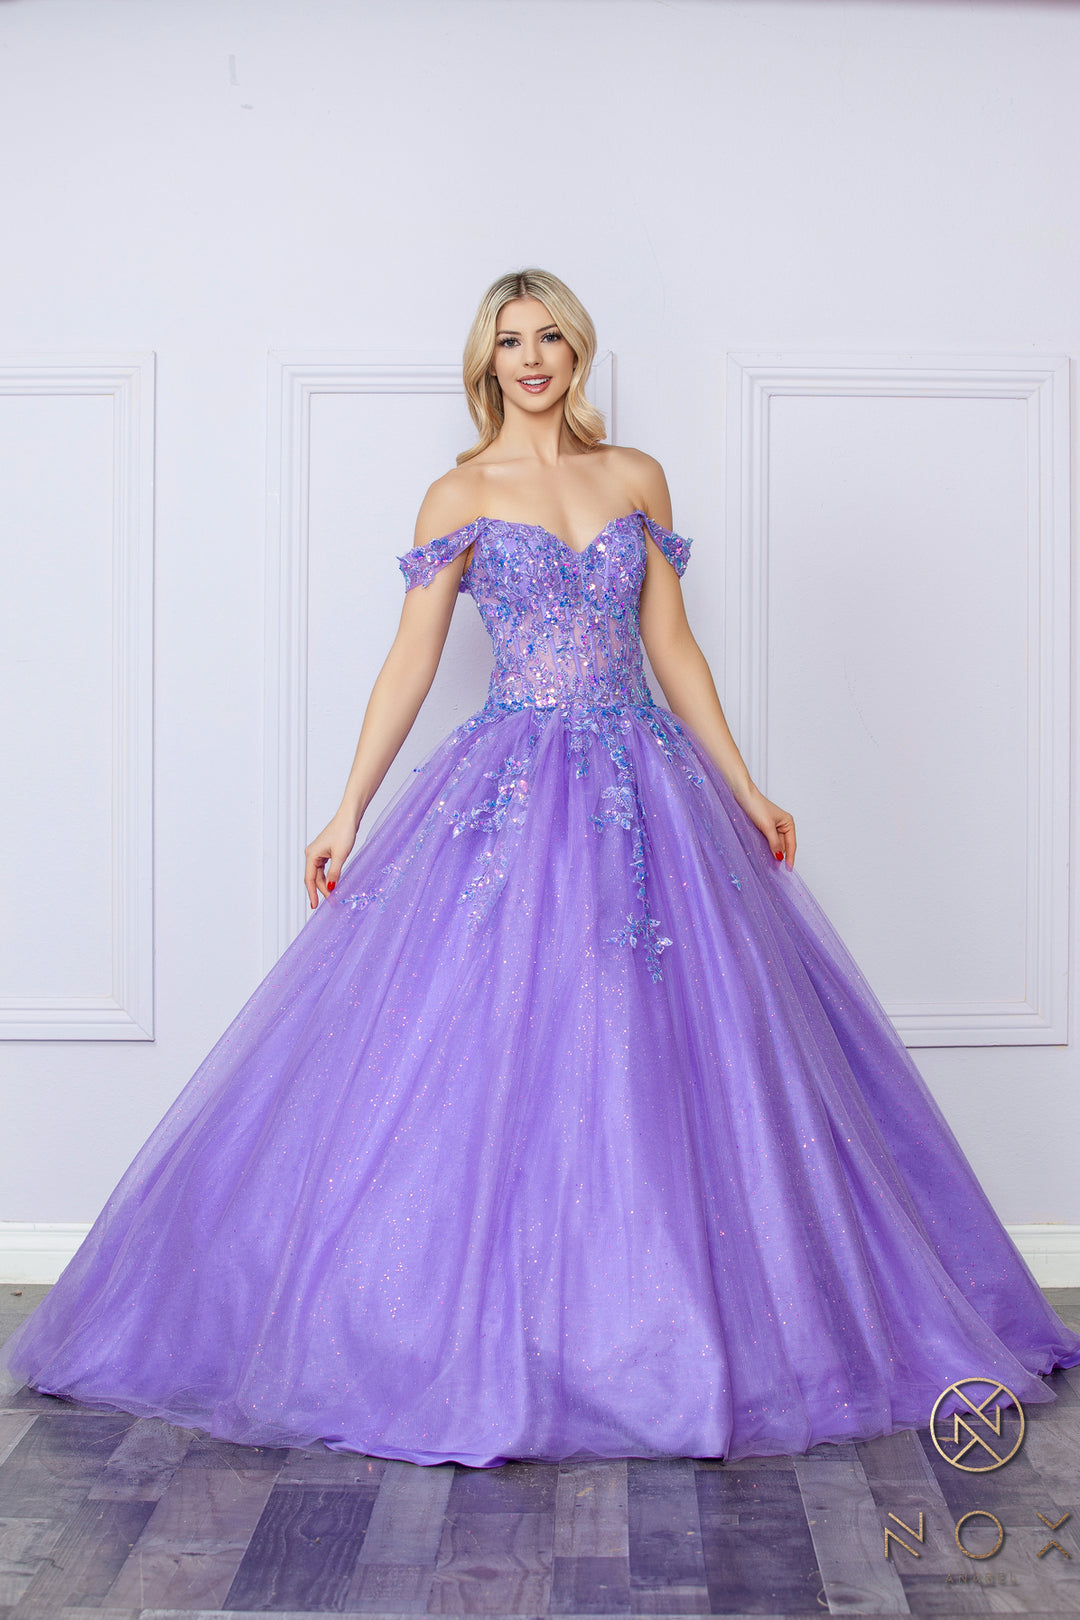 Applique Off Shoulder Corset Ball Gown by Nox Anabel H1349